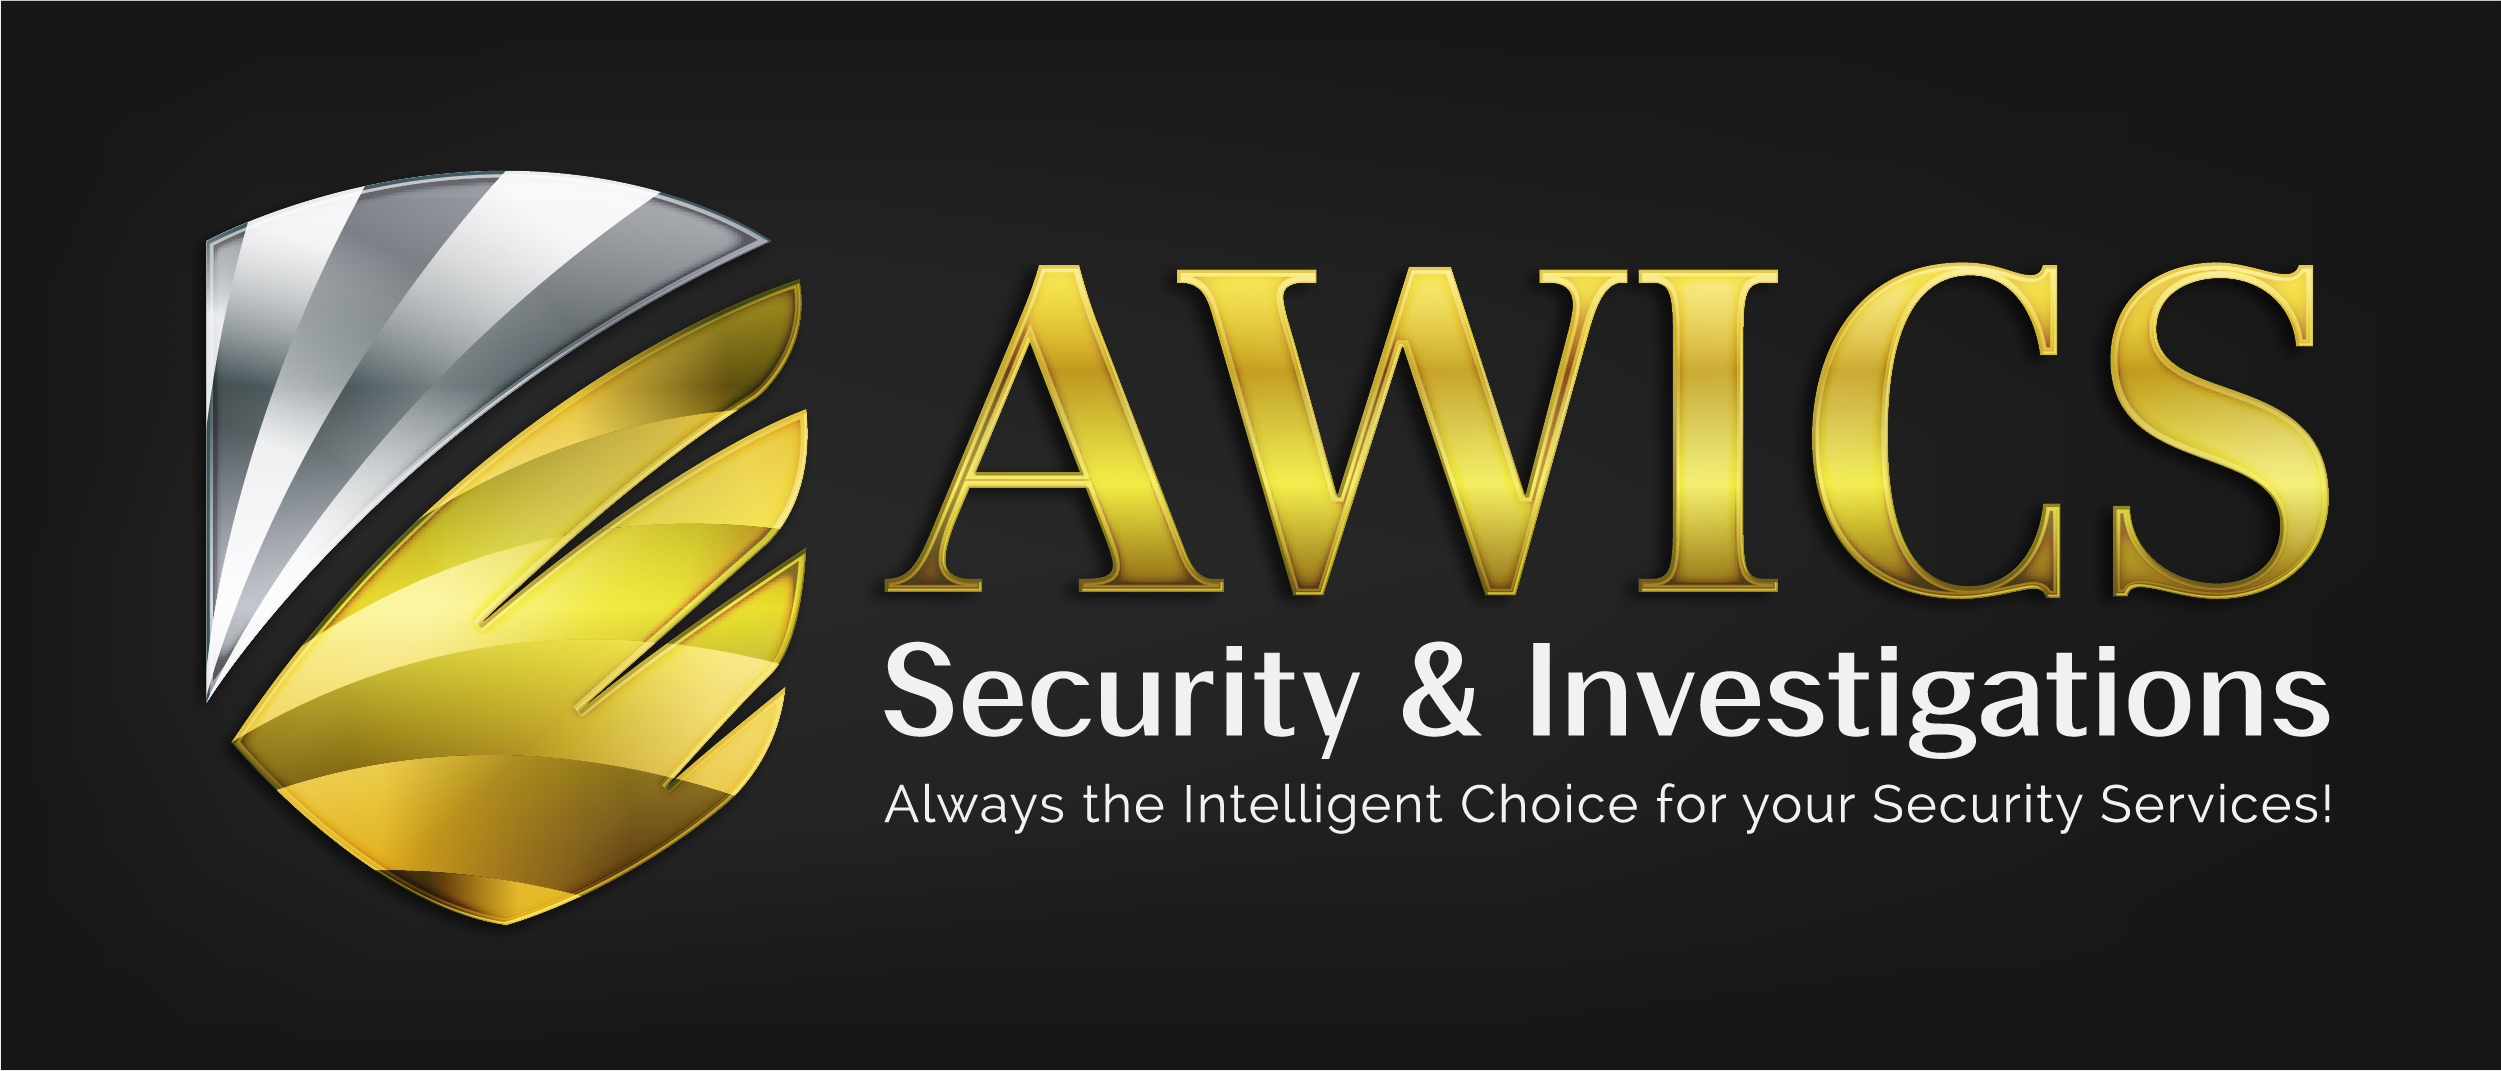 AWICS Security & Investigations Services